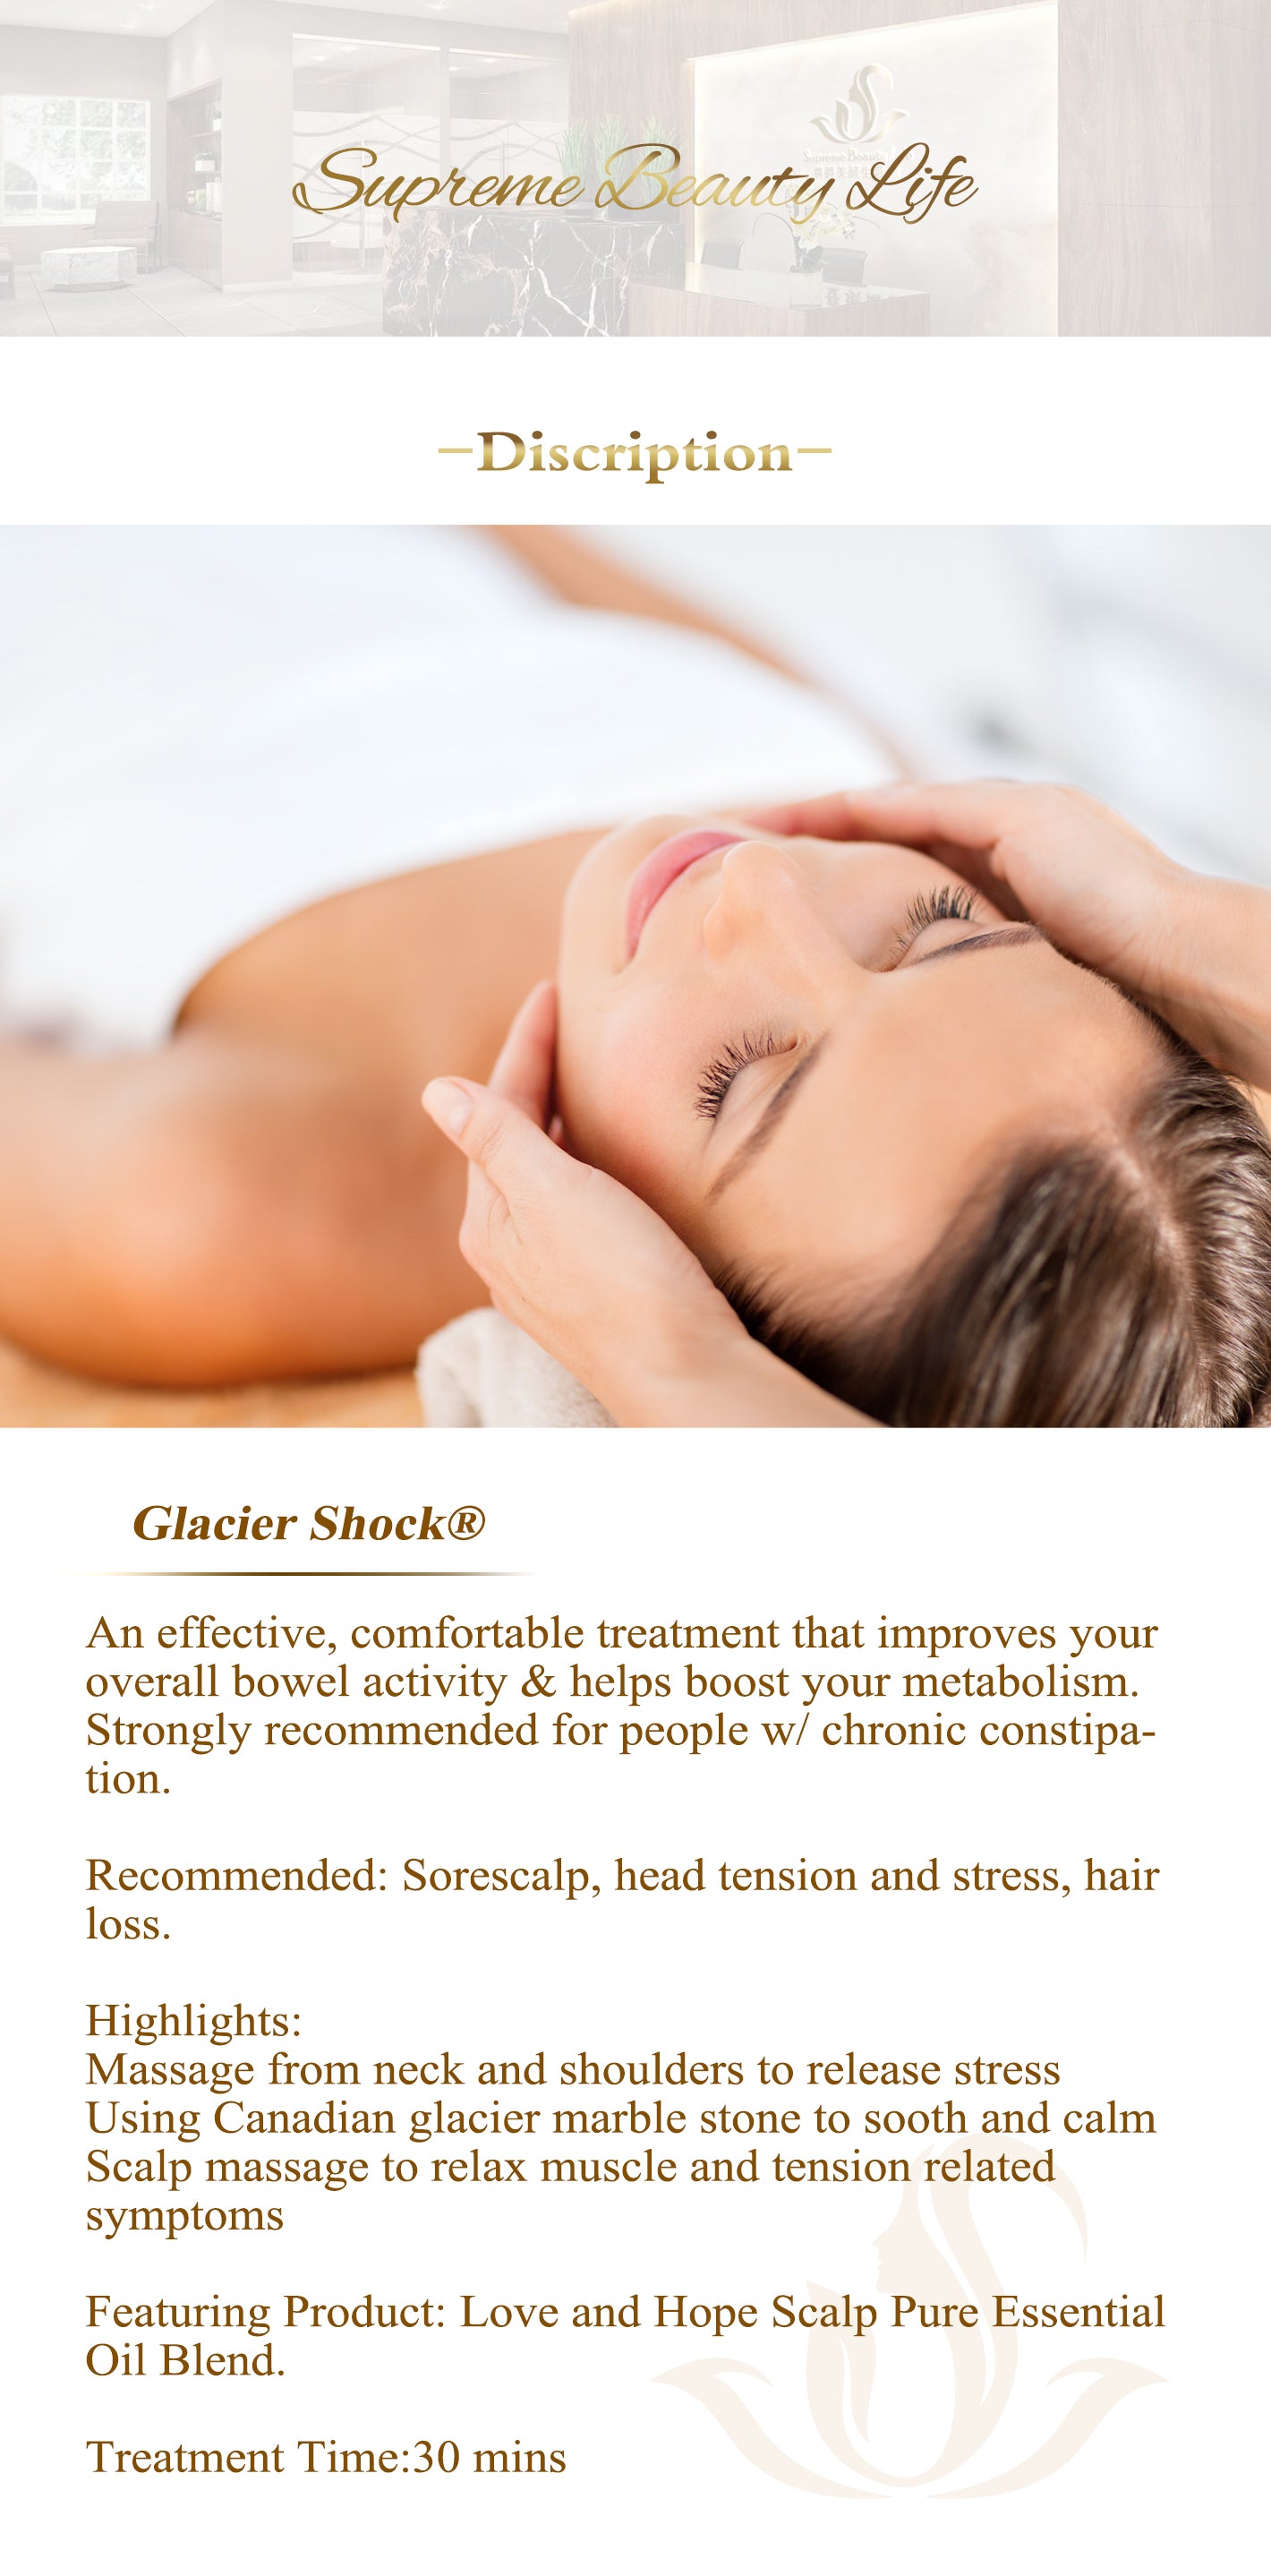 Head and neck massage, Duration 30 minutes